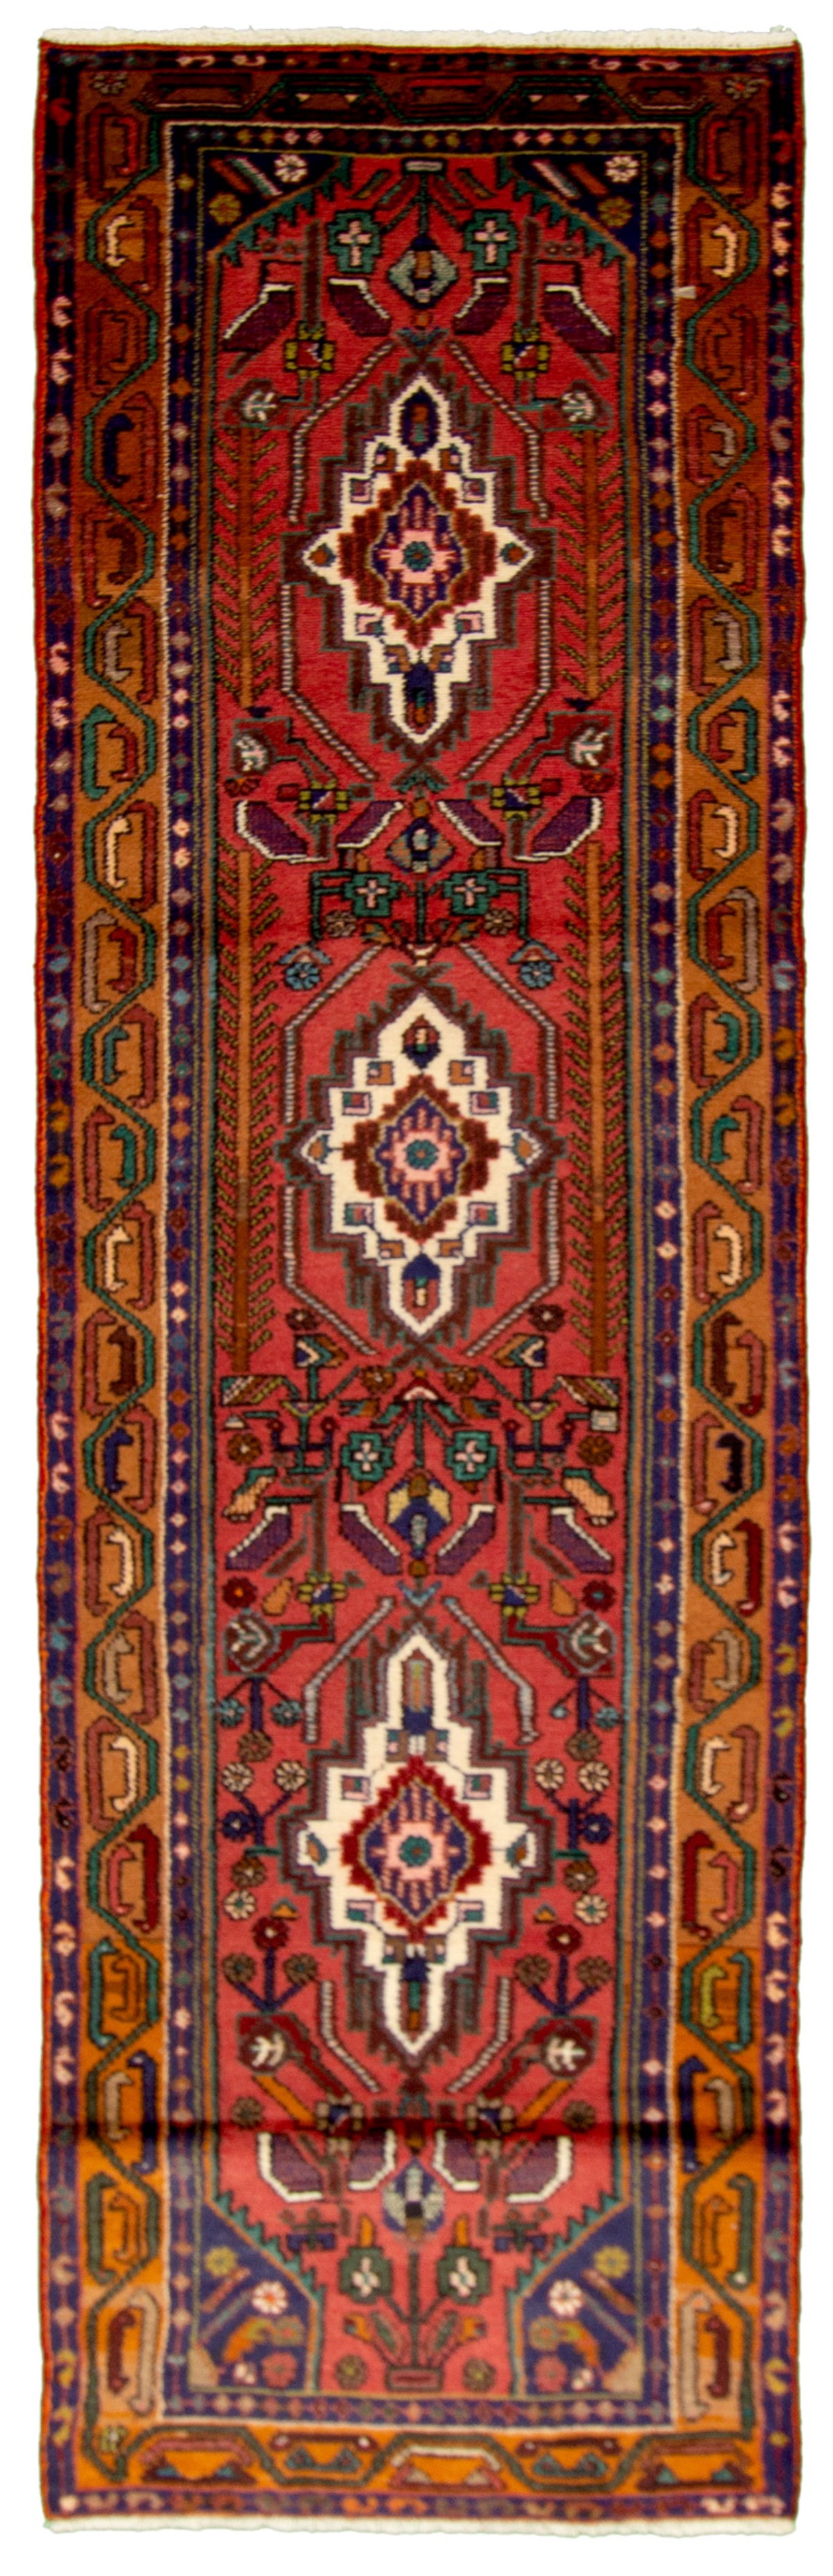 Hand-knotted Koliai Red Wool Rug 2'8" x 10'6"  Size: 2'8" x 10'6"  